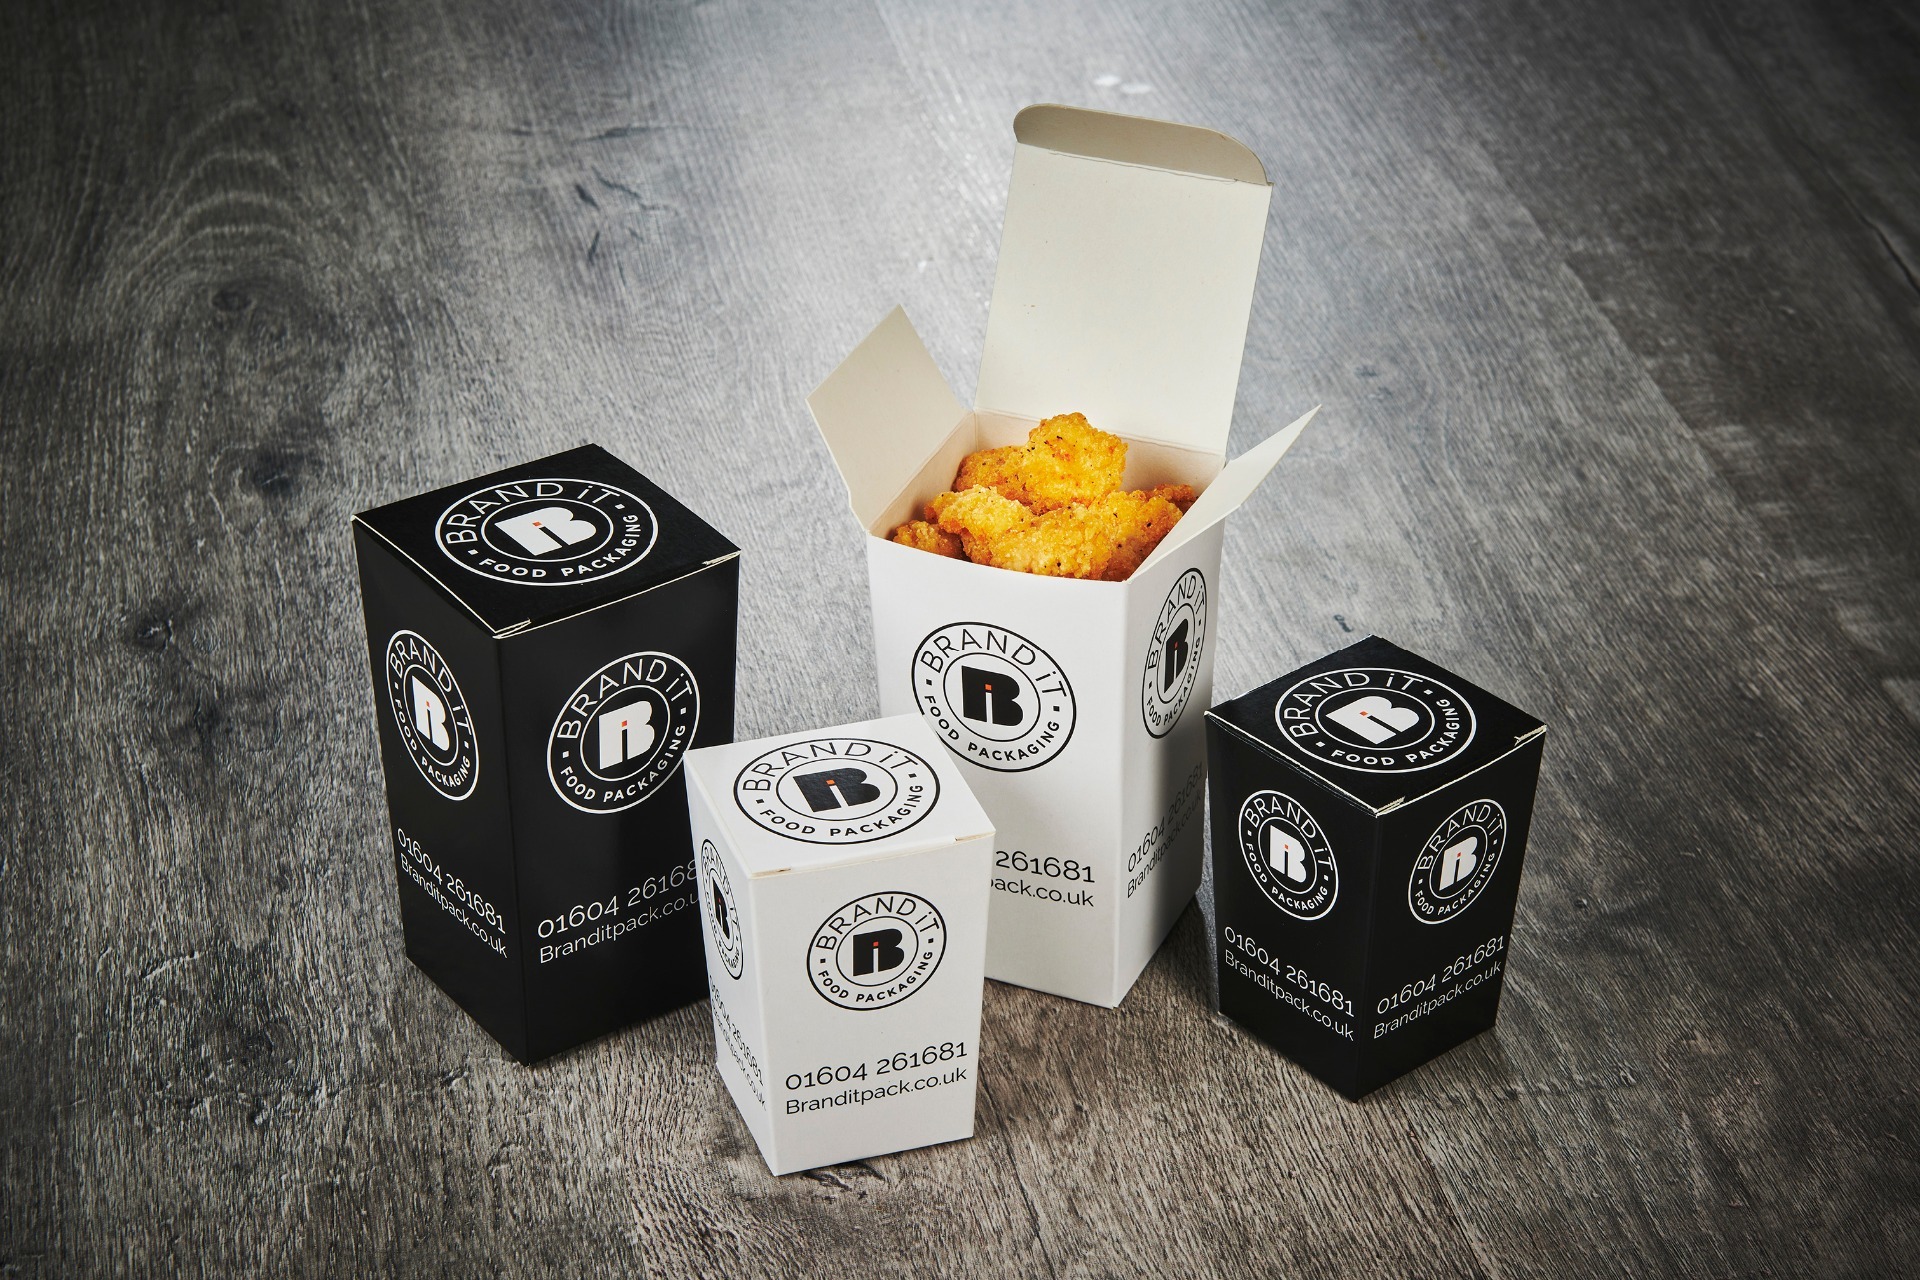 Branded flat pack popcorn chicken boxes